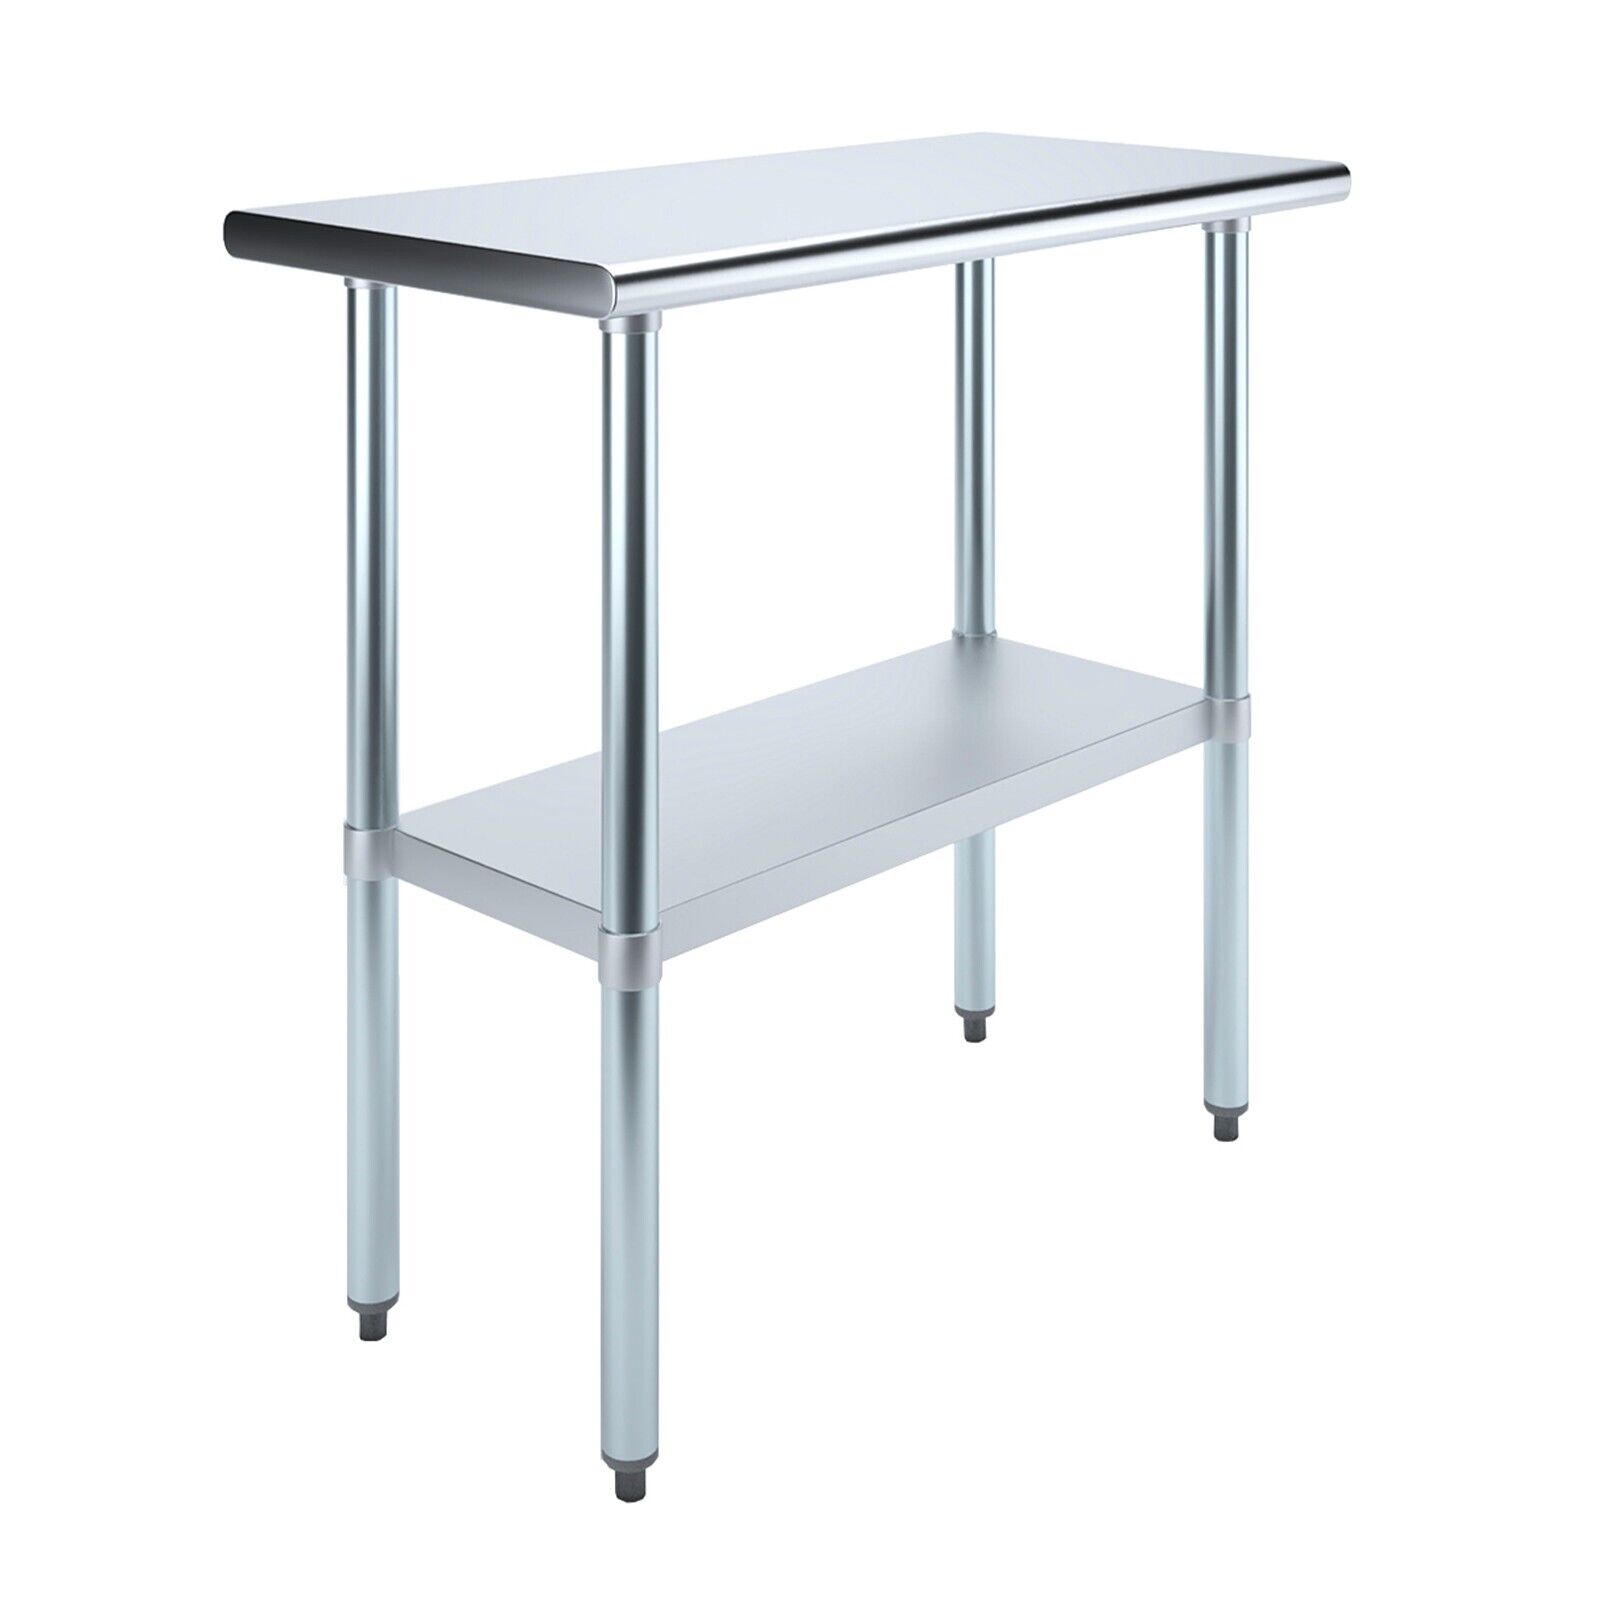 18 in. x 36 in. Stainless Steel Work Table | Metal Utility Table